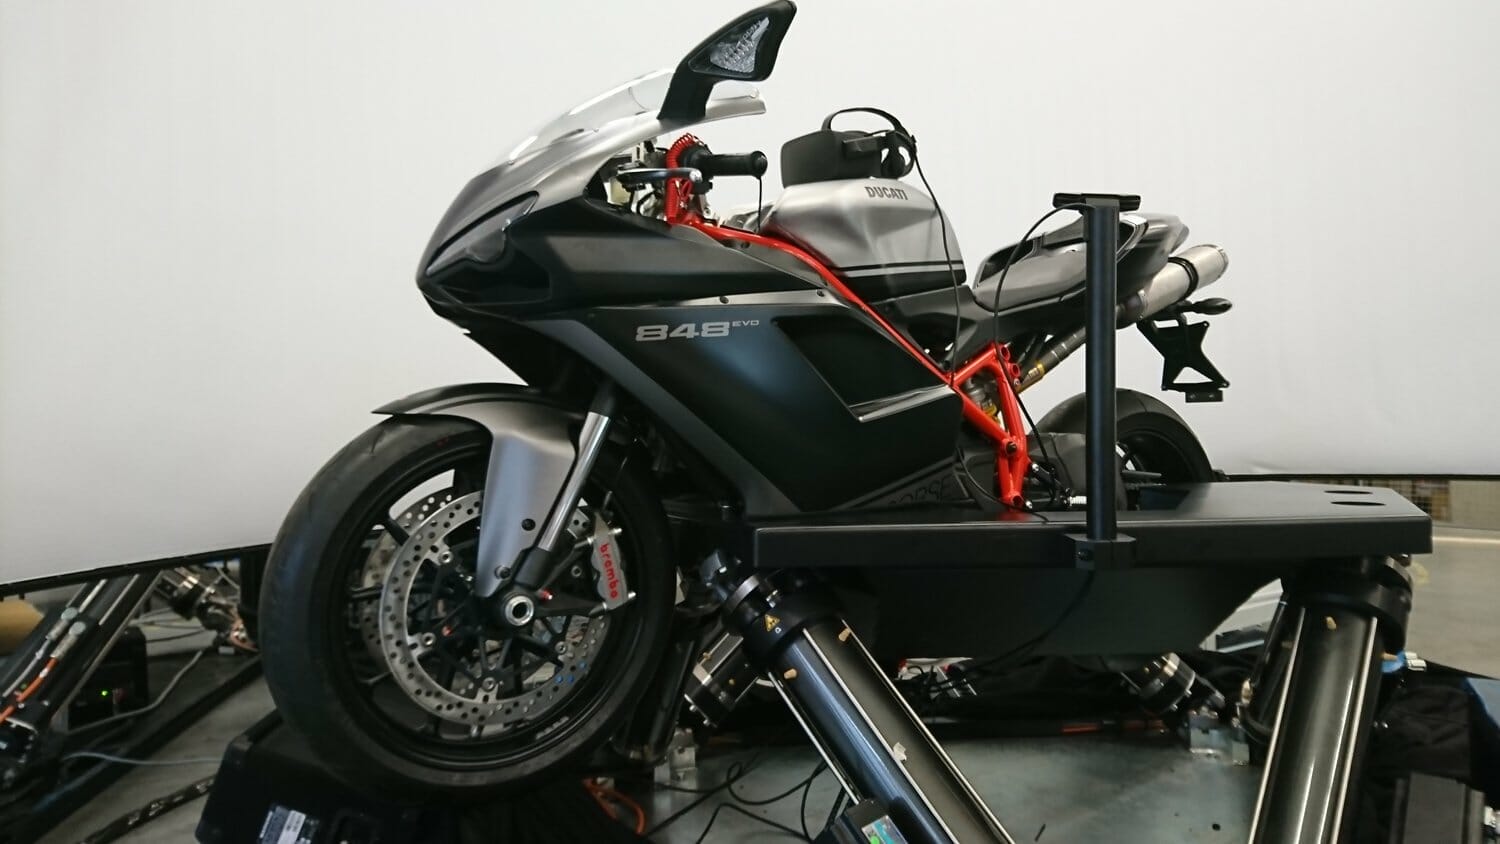 Motorcycle Simulator from Cruden